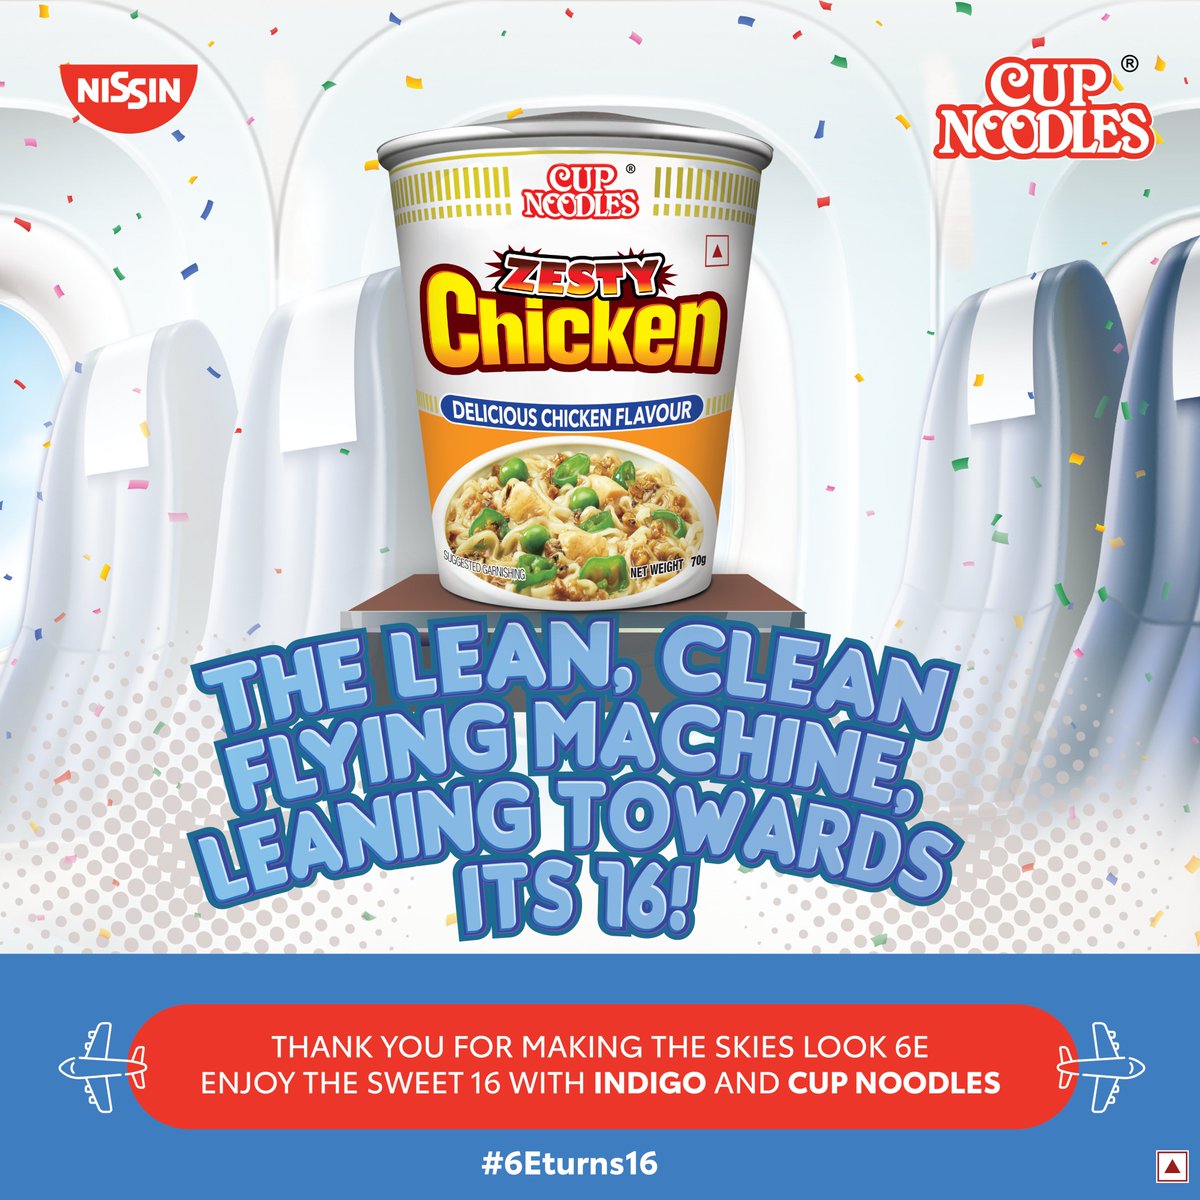 16 years of one flying colour! Thank you for making our skies 6E. Whenever, Wherever, you IndiGo. Cup Noodles is by your side. @IndiGo6E #6ETurns16 #CupNoodles #CupNoodlesIndia #Nissin #NissinIndia #IndiGo #LetsIndiGo #Birthday #Aviation #LeanCleanFlyingMachine